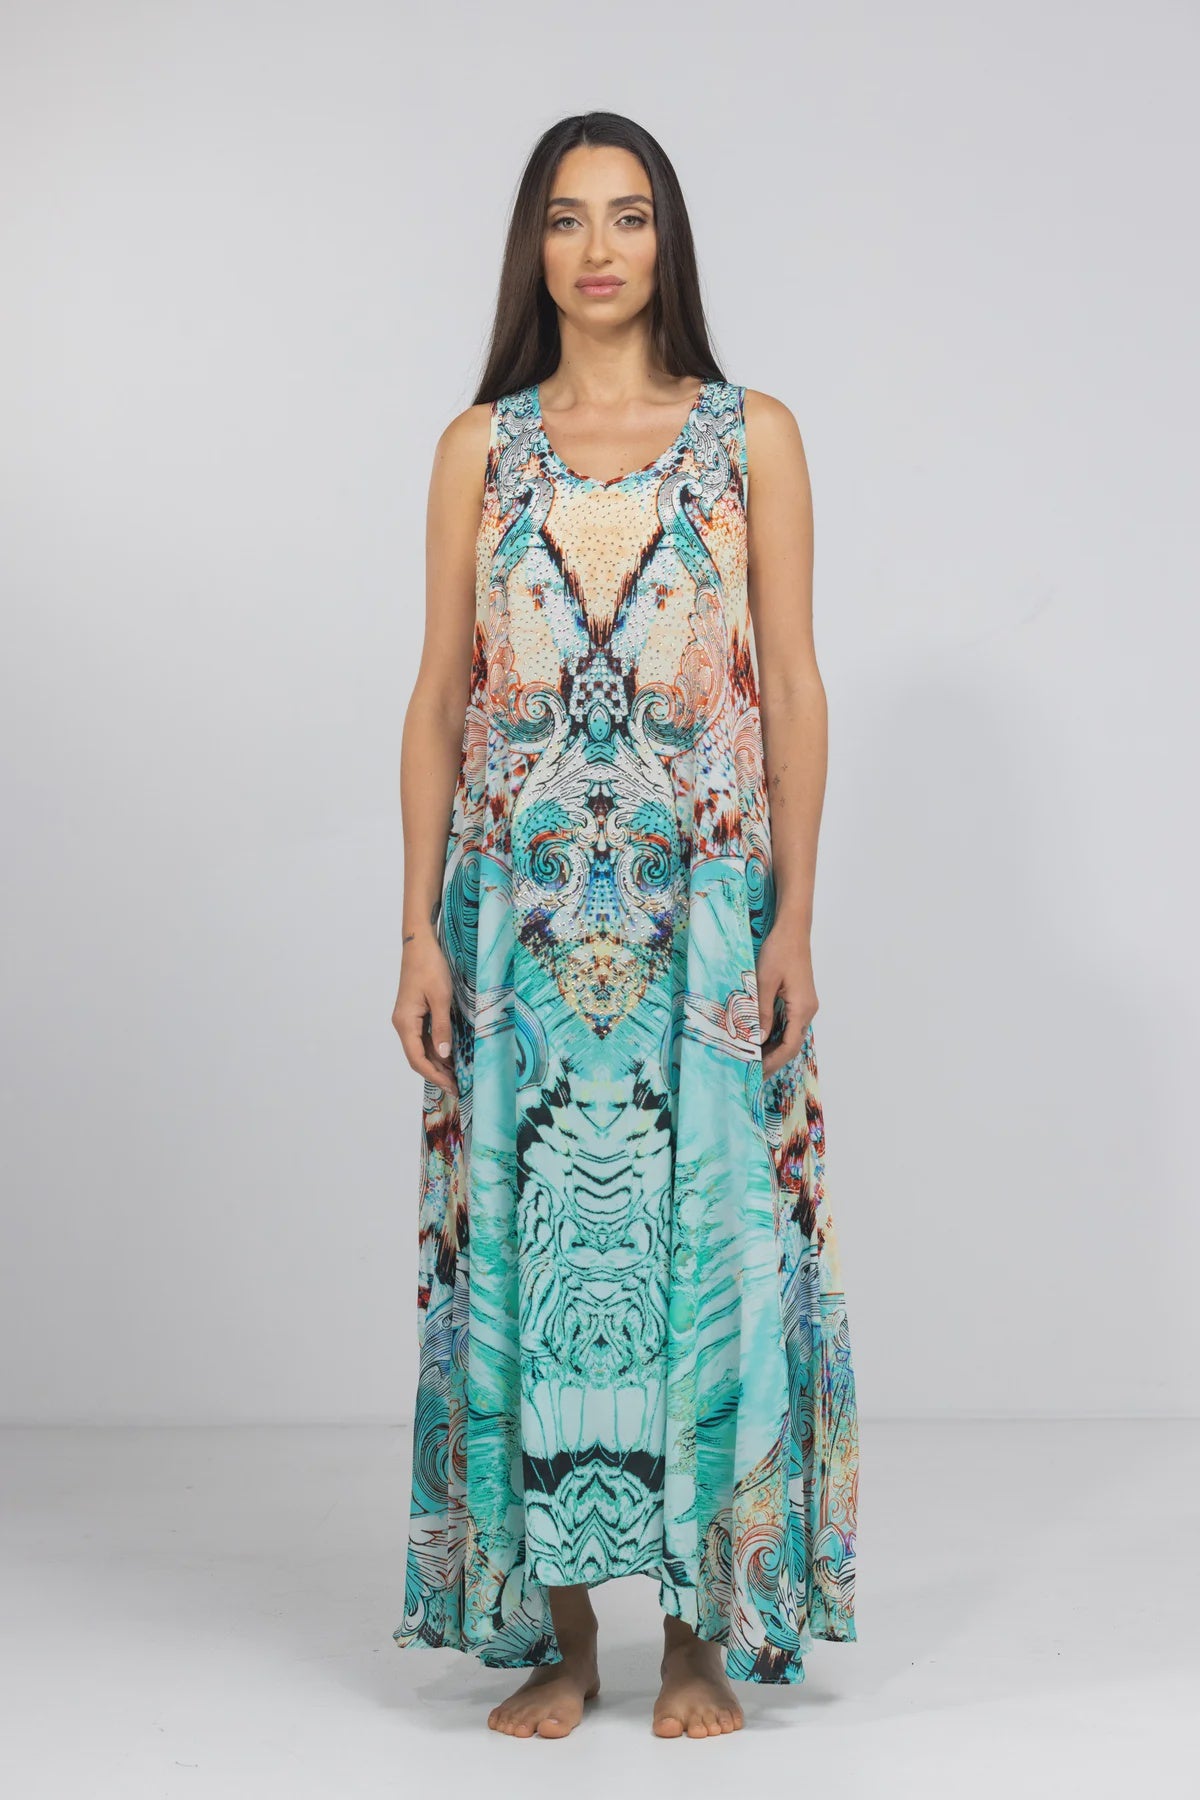 INOA Gold Coast Collection Flowing Maxi Dress